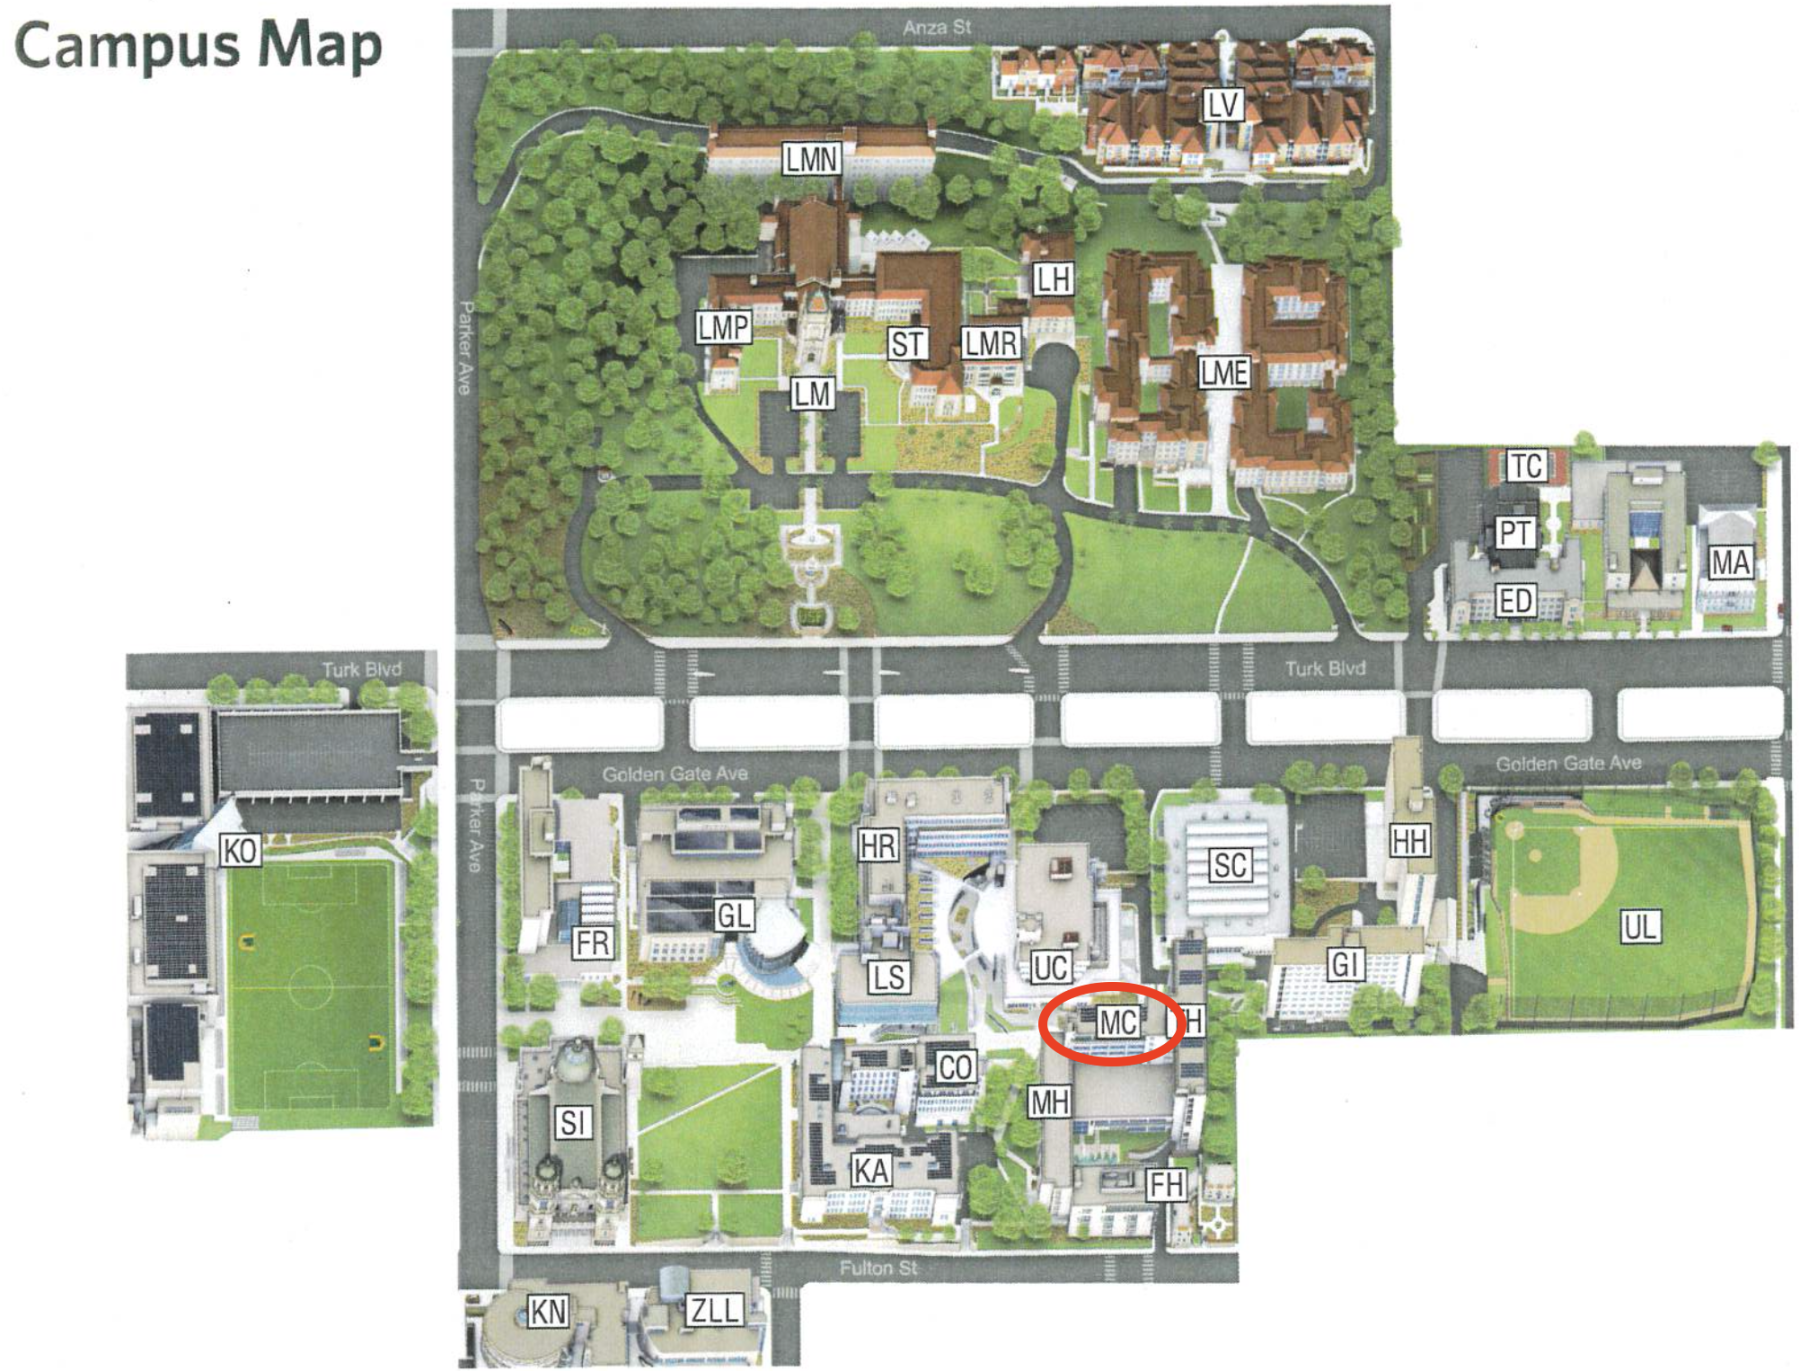 Map of the USF campus. The McLaren Complex is located between Malloy Hall and the University Center, adjacent to Toler Hall.